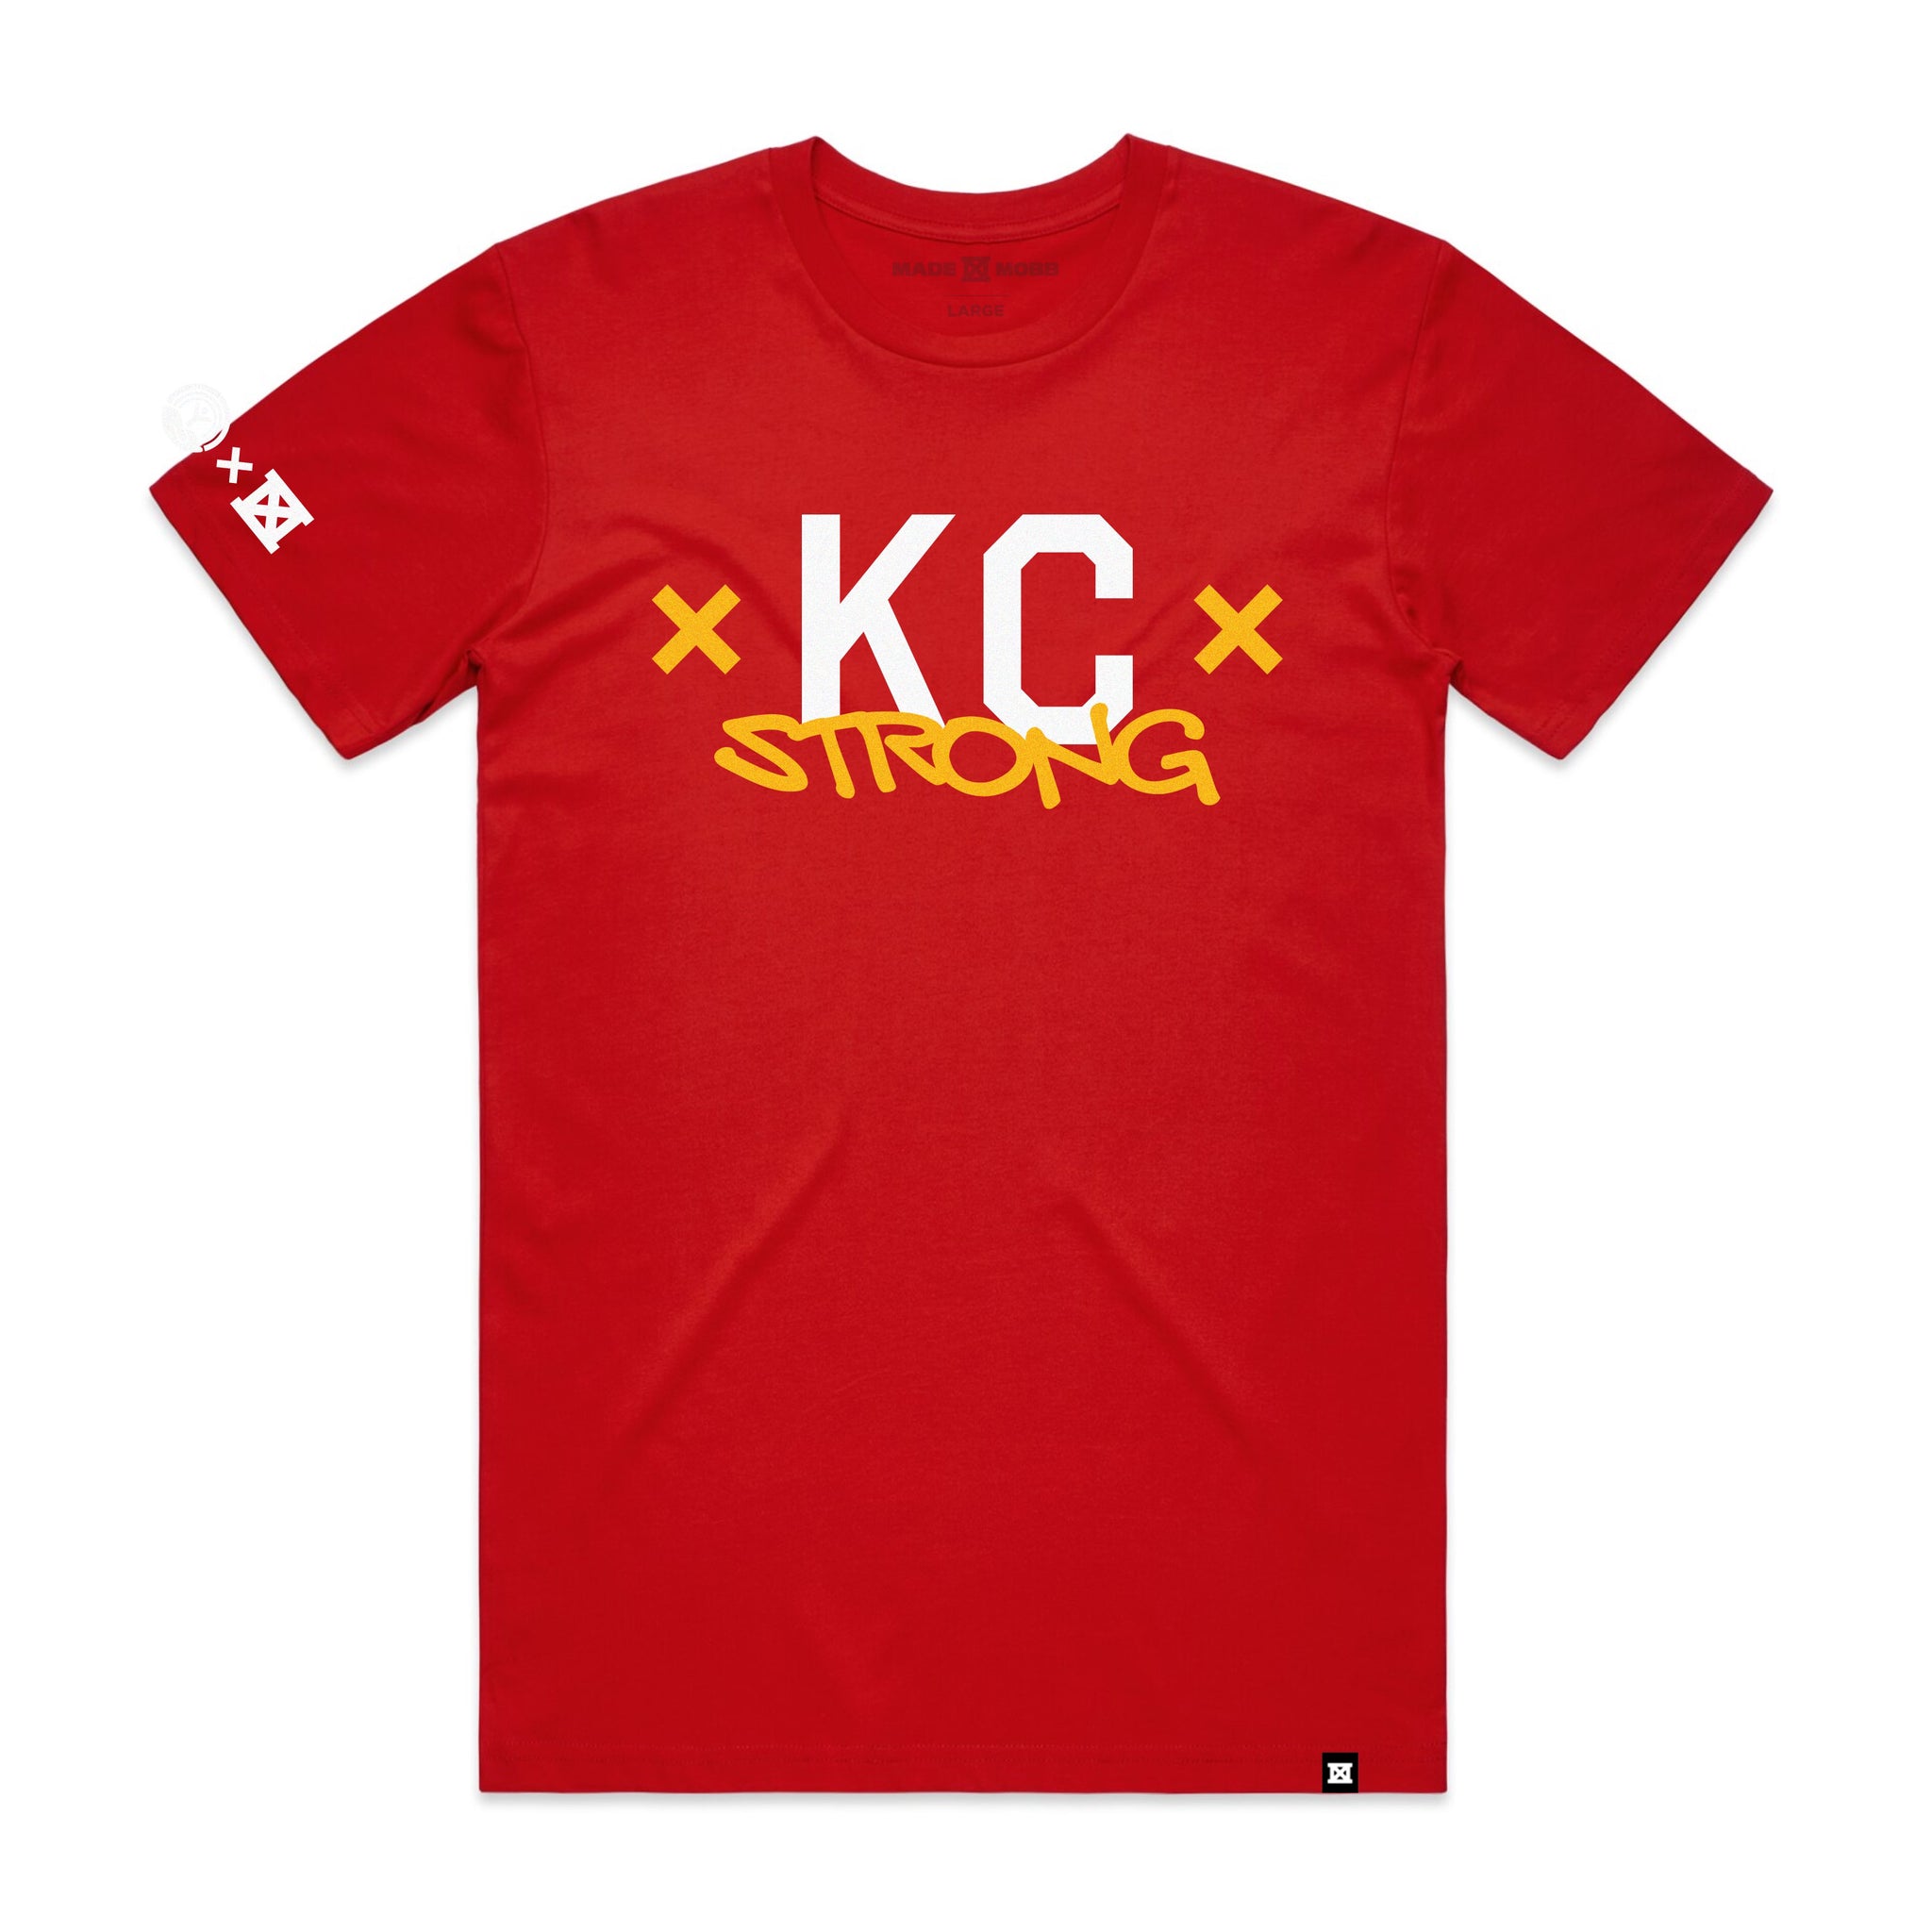 KC STRONG T-Shirt - United Way X MADE MOBB